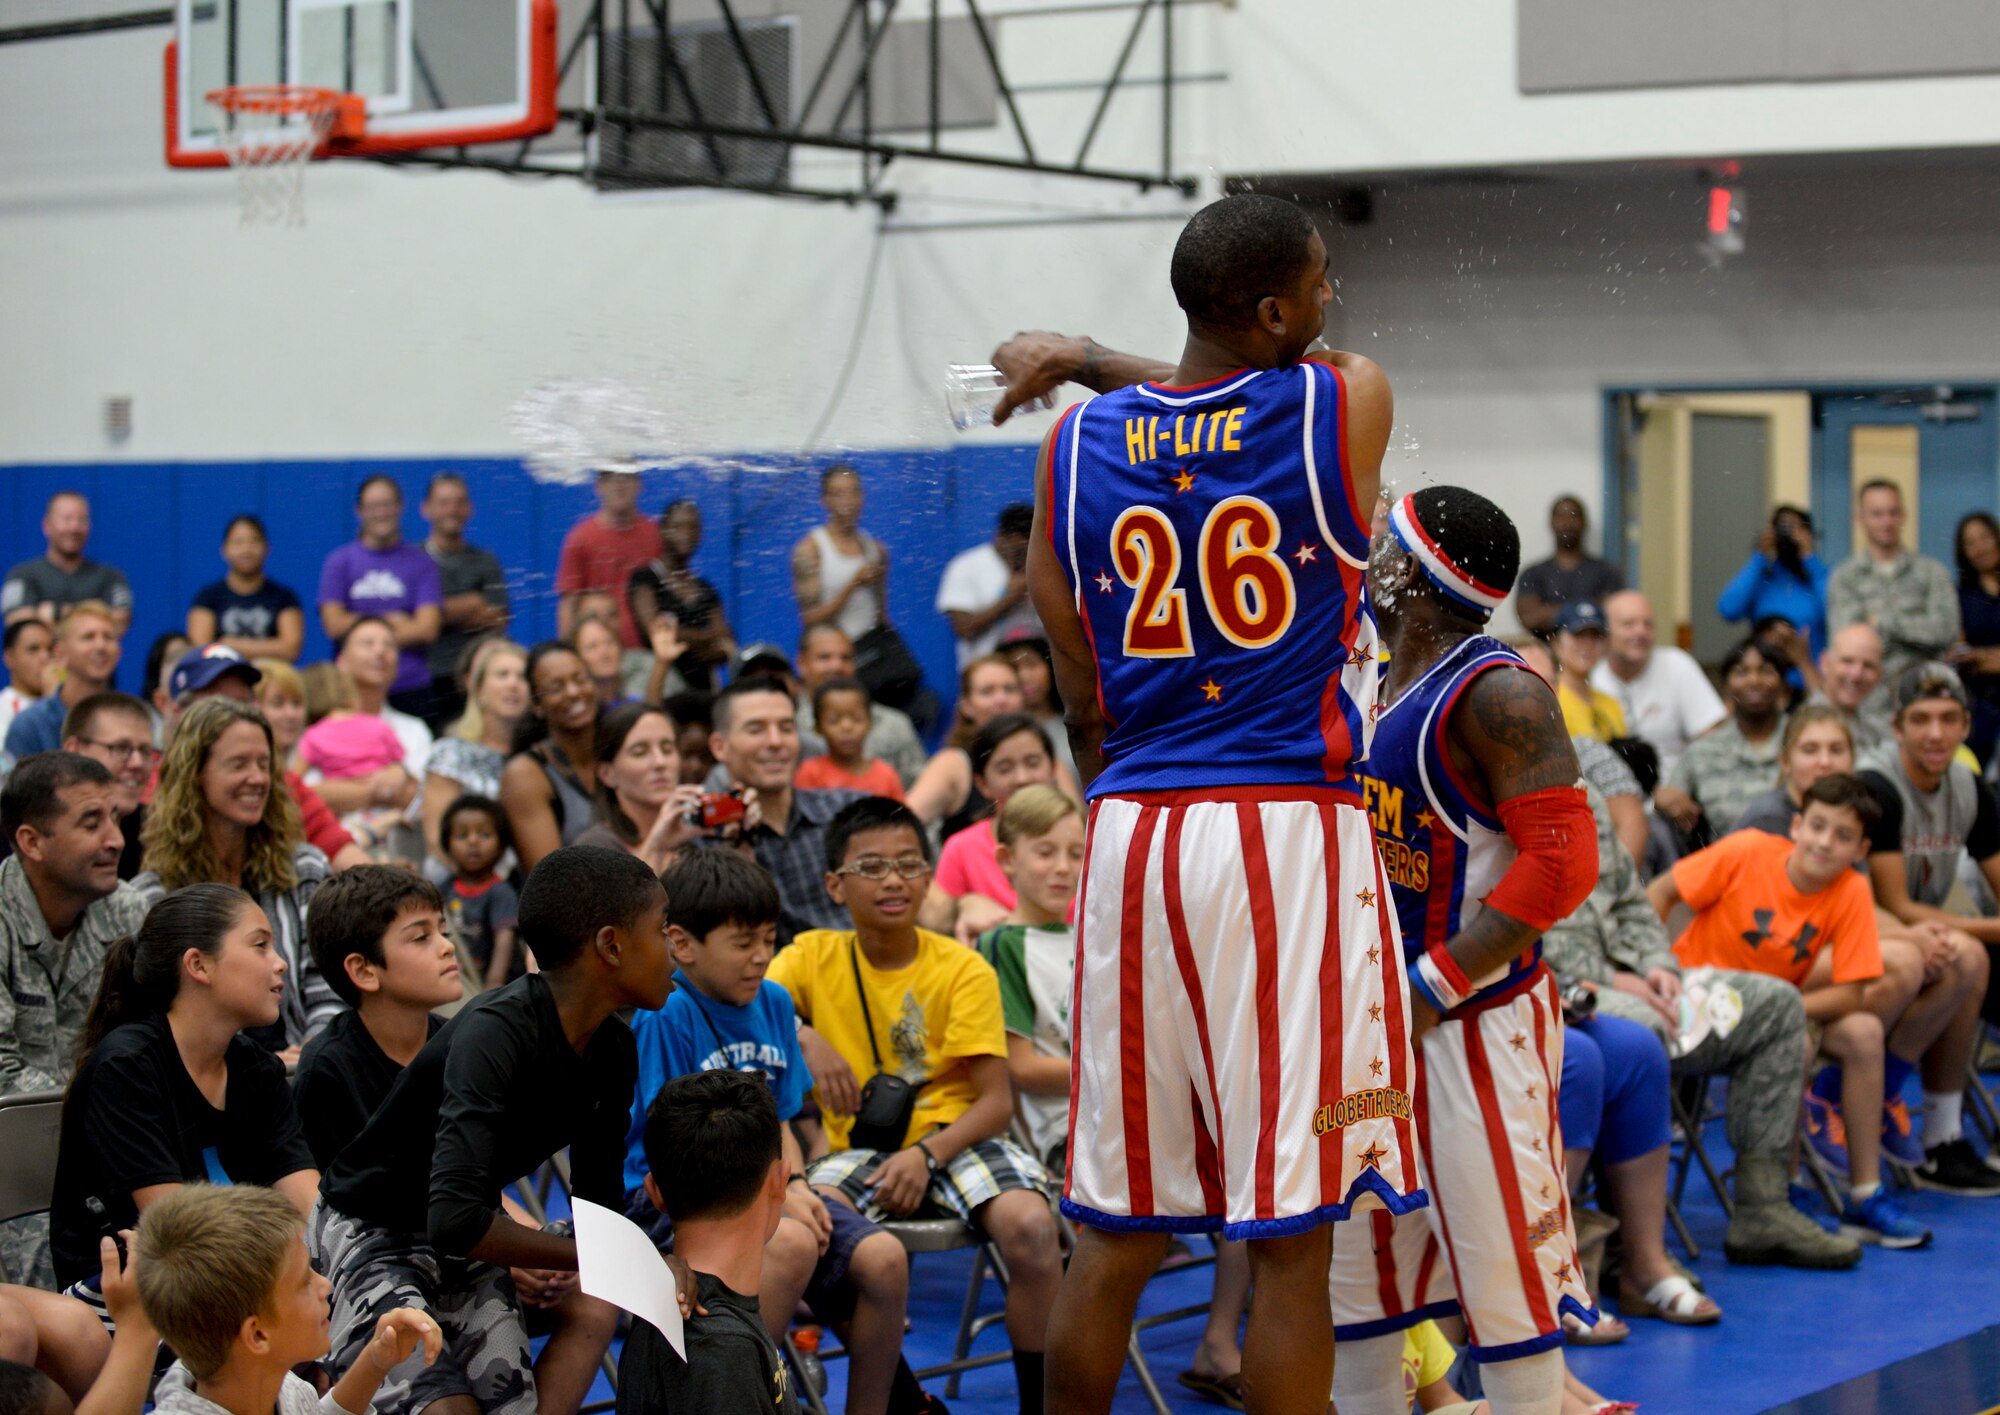 Hi-Lite splashes a cup of water into Too-Tall’s face, both members of the Harlem Globetrotters, during an exhibition basketball game against the Washington Generals, Dec. 1, 2014, at Andersen Air Force Base, Guam. The Globetrotters captivated Team Andersen with their athleticism, theater and comedy as well as its audience participation, choreography, tricks and their overall basketball skill. (U.S. Air Force photo by Staff Sgt. Robert Hicks/Released)  